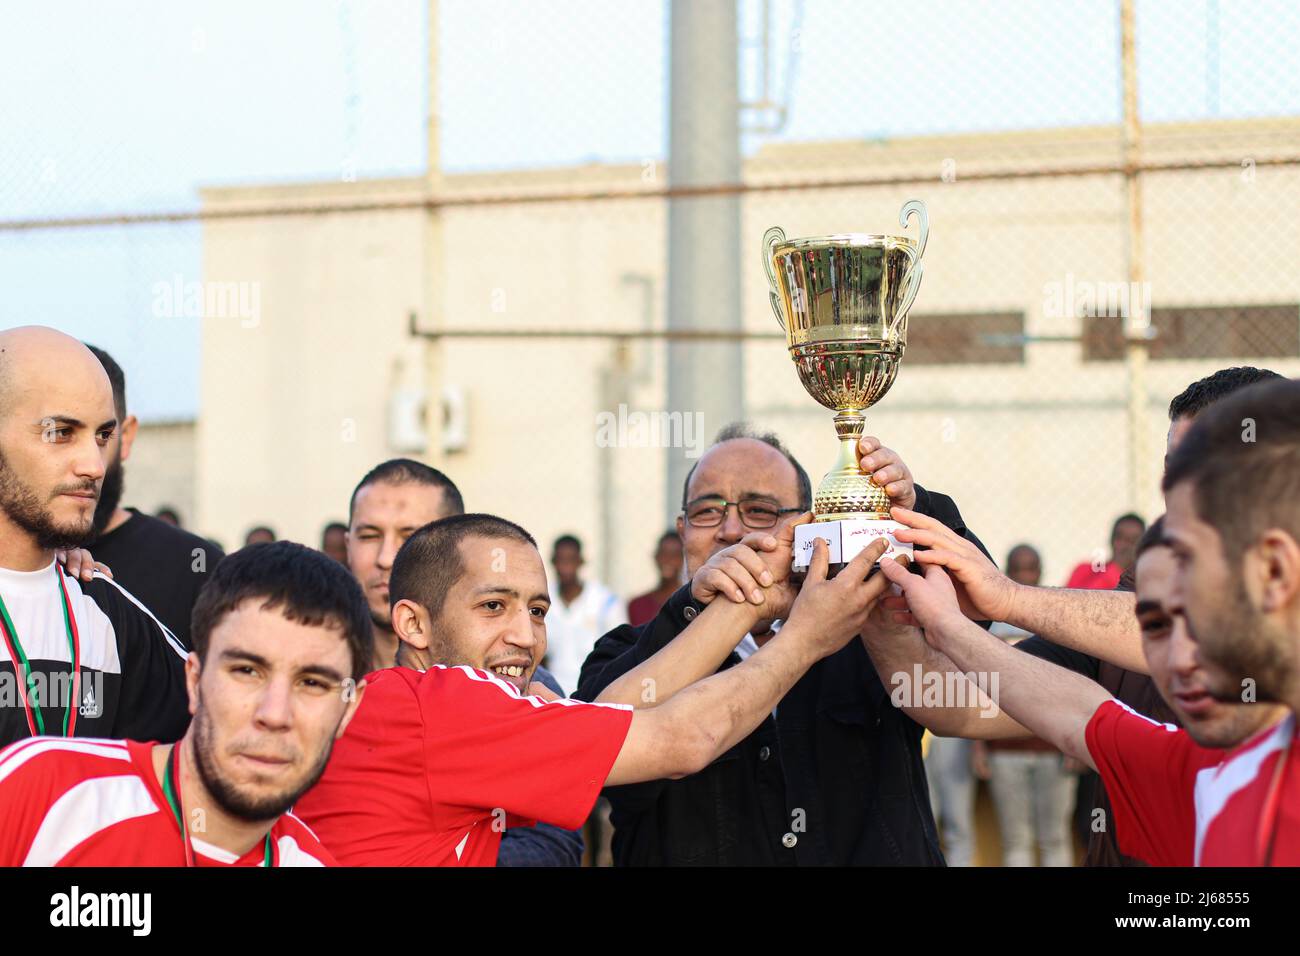 The Libyan team holds the cup after its victory over the Nigerian team in the Ramadan Football League for the inmates of Al-Sakt Prison in Misurata Stock Photo